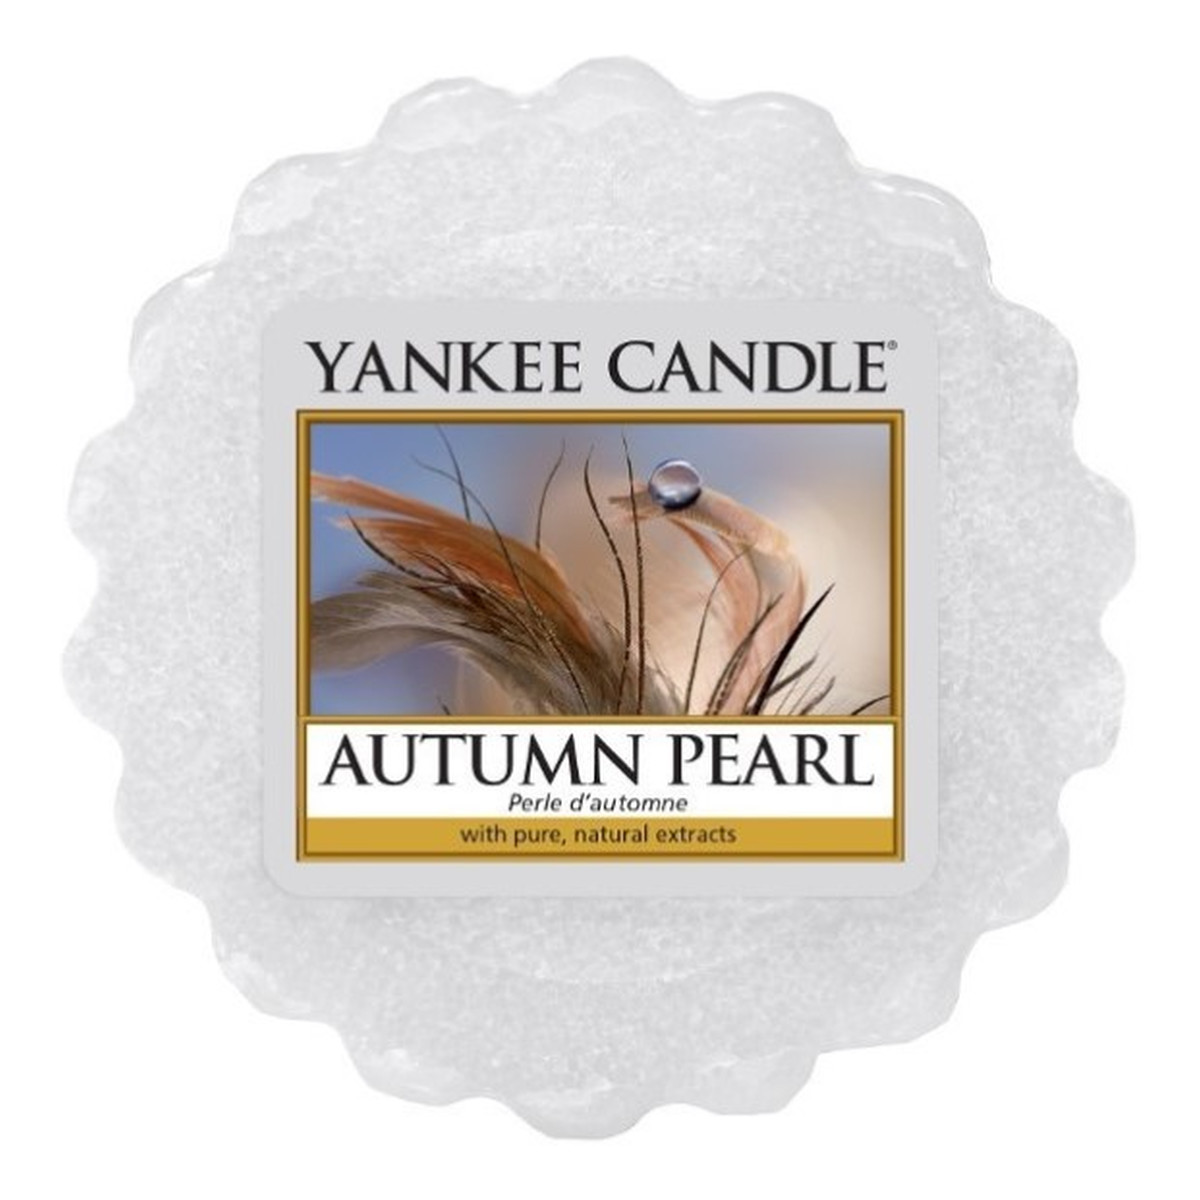 Yankee Candle Wax Wosk zapachowy Autumn Pearl 22g